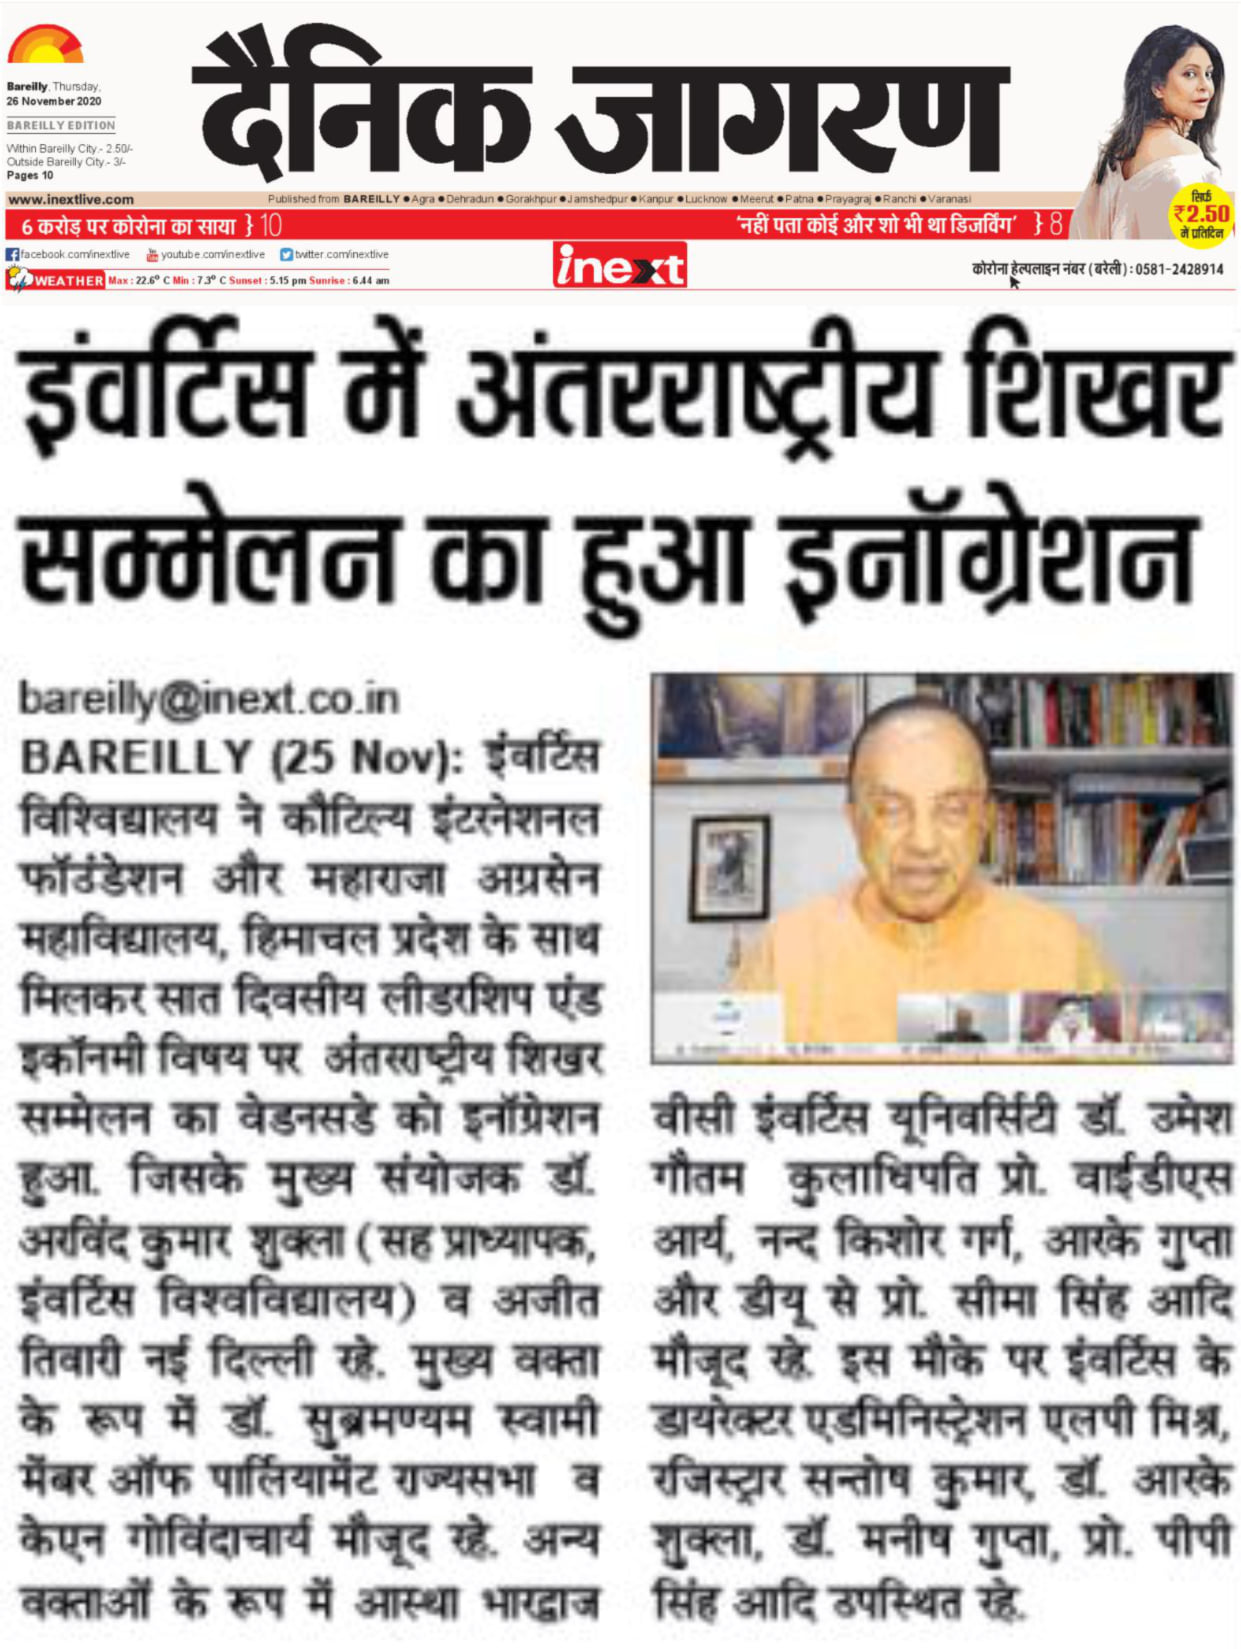 Media coverage in DainikJagran about the International Summit